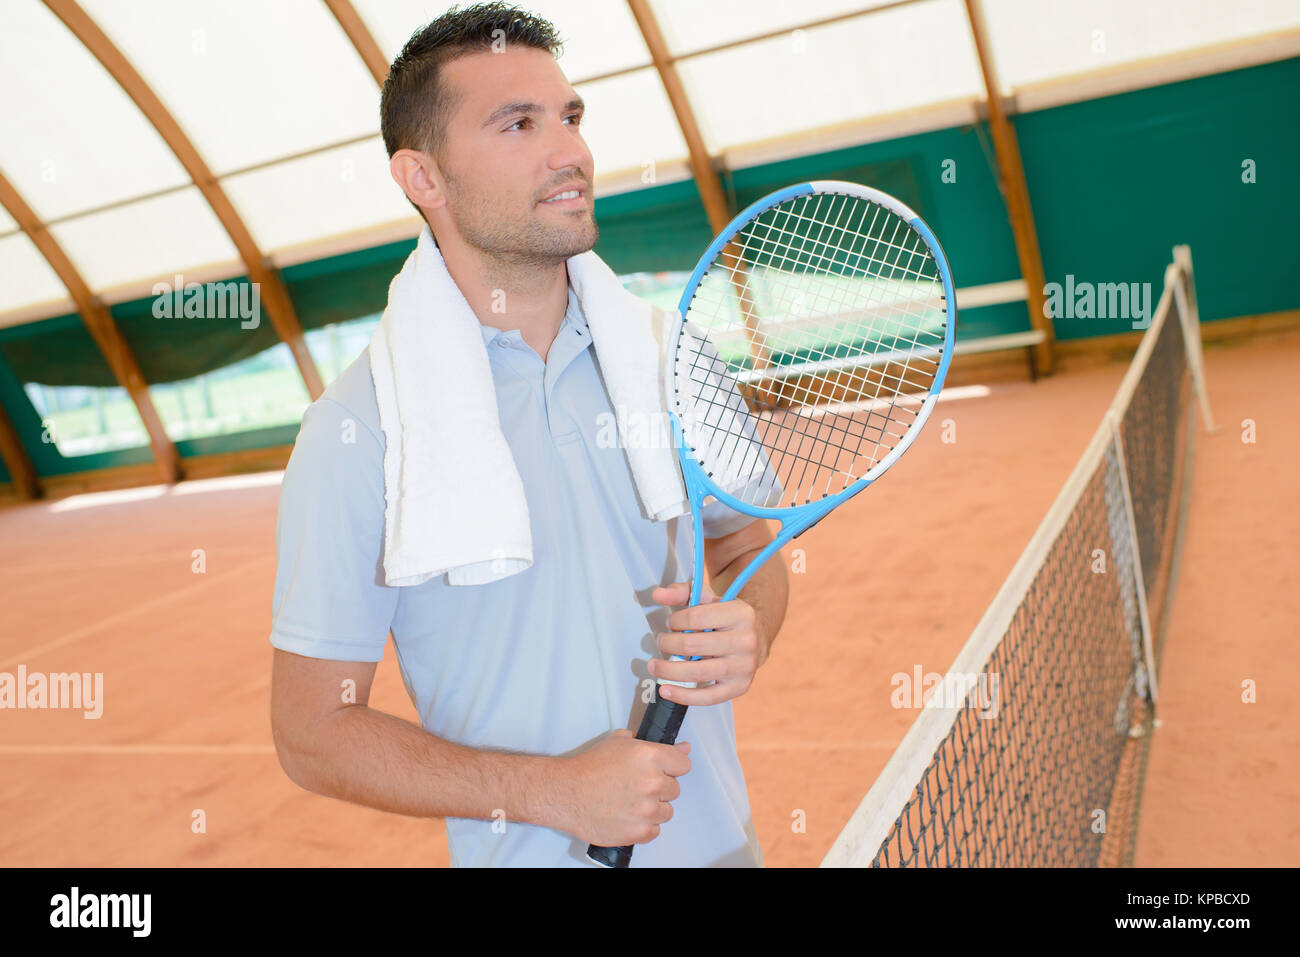 tennis player at net Stock Photo